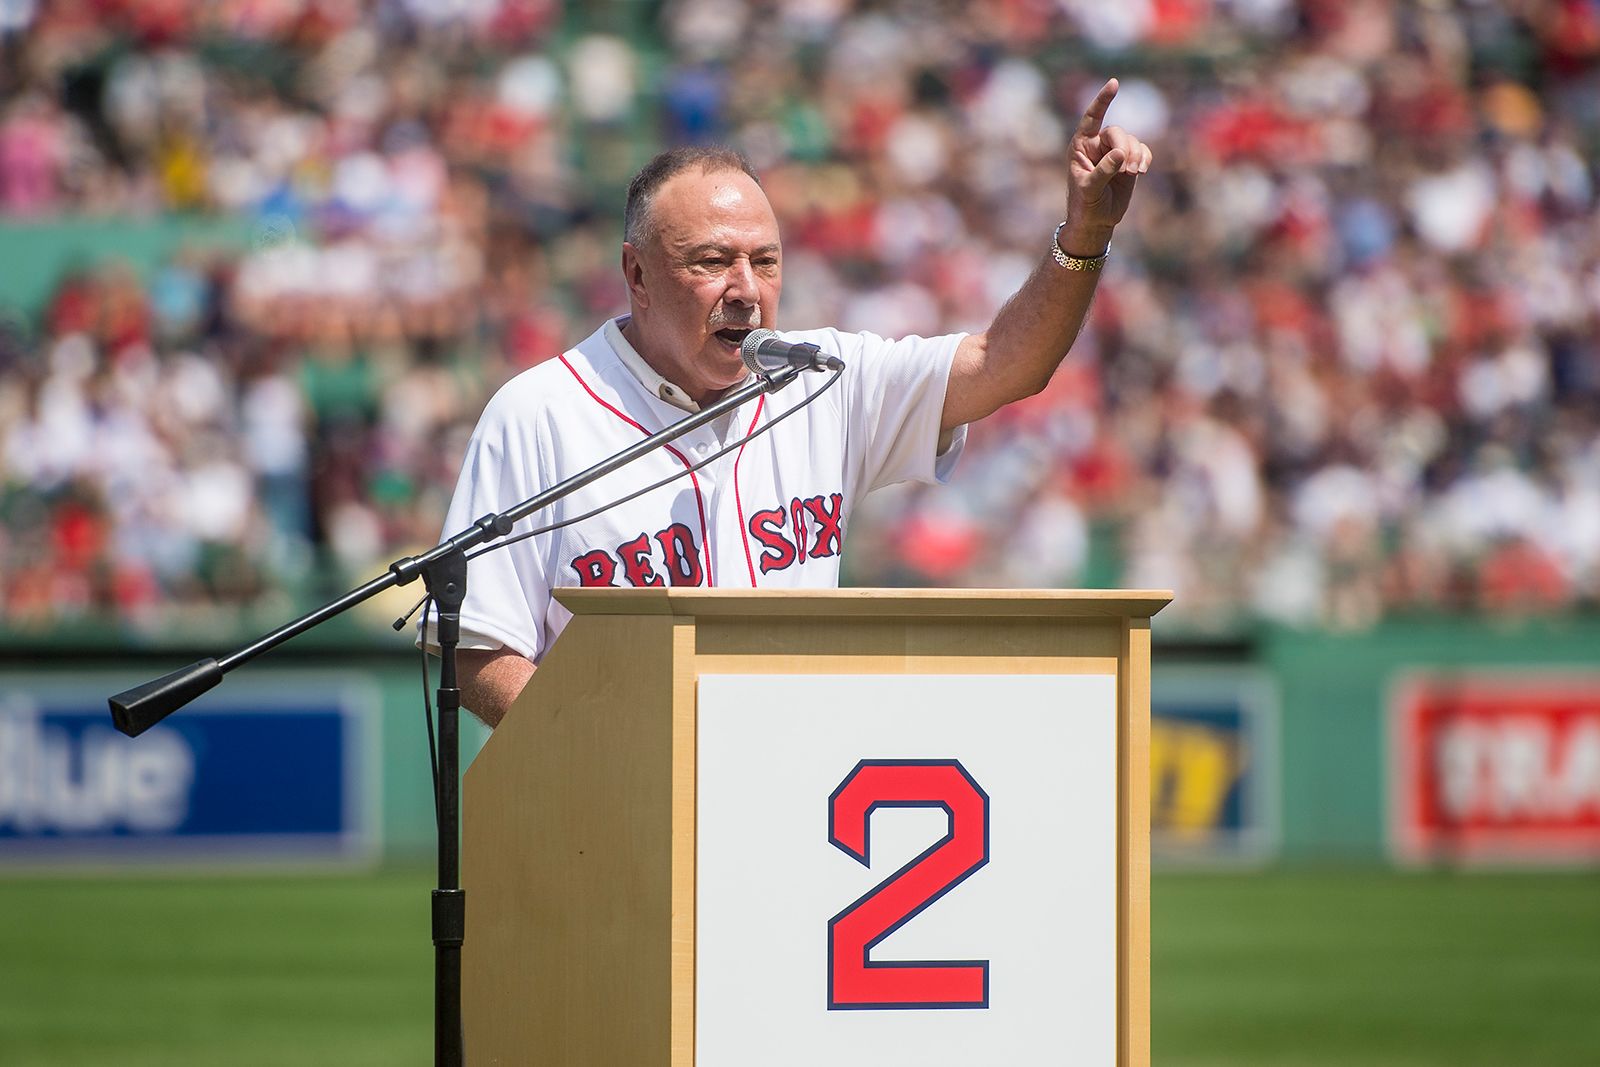 Jerry Remy Does Not Like To Be Called a Bad Grandparent - Boston Magazine